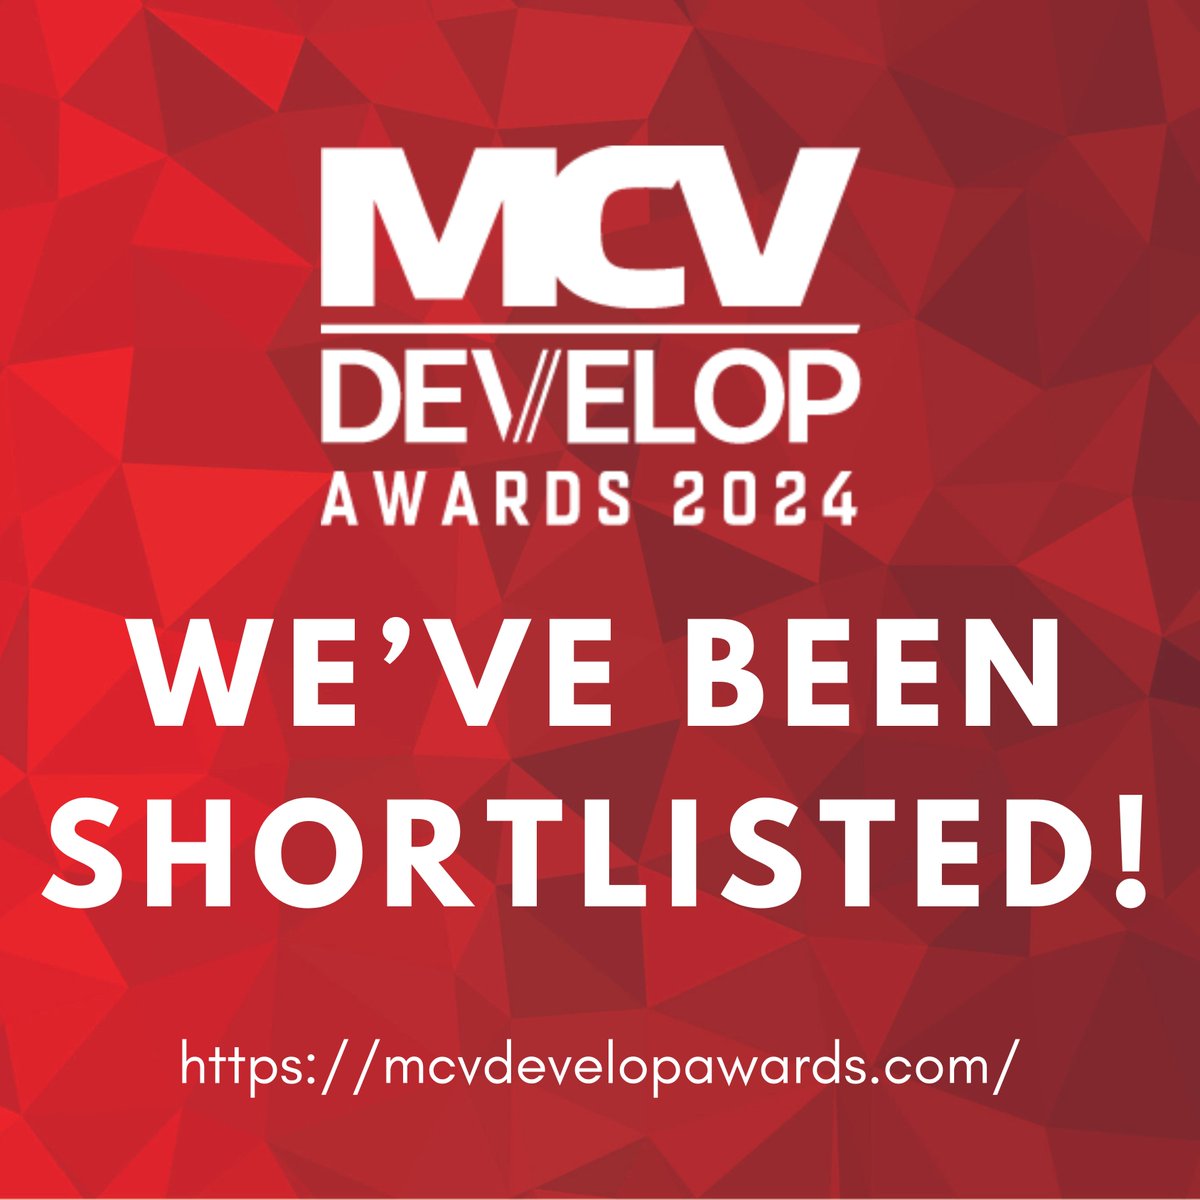 We’re over the moon to be shortlisted TWICE in this year’s @MCV_DEVELOP awards! 🤩 As a studio we’re up for Indie Studio of the Year, and @PowerWashSim is in the running for the Ongoing Innovation of the Year award! 💙 Read more 👉 bit.ly/4dimN3W👈